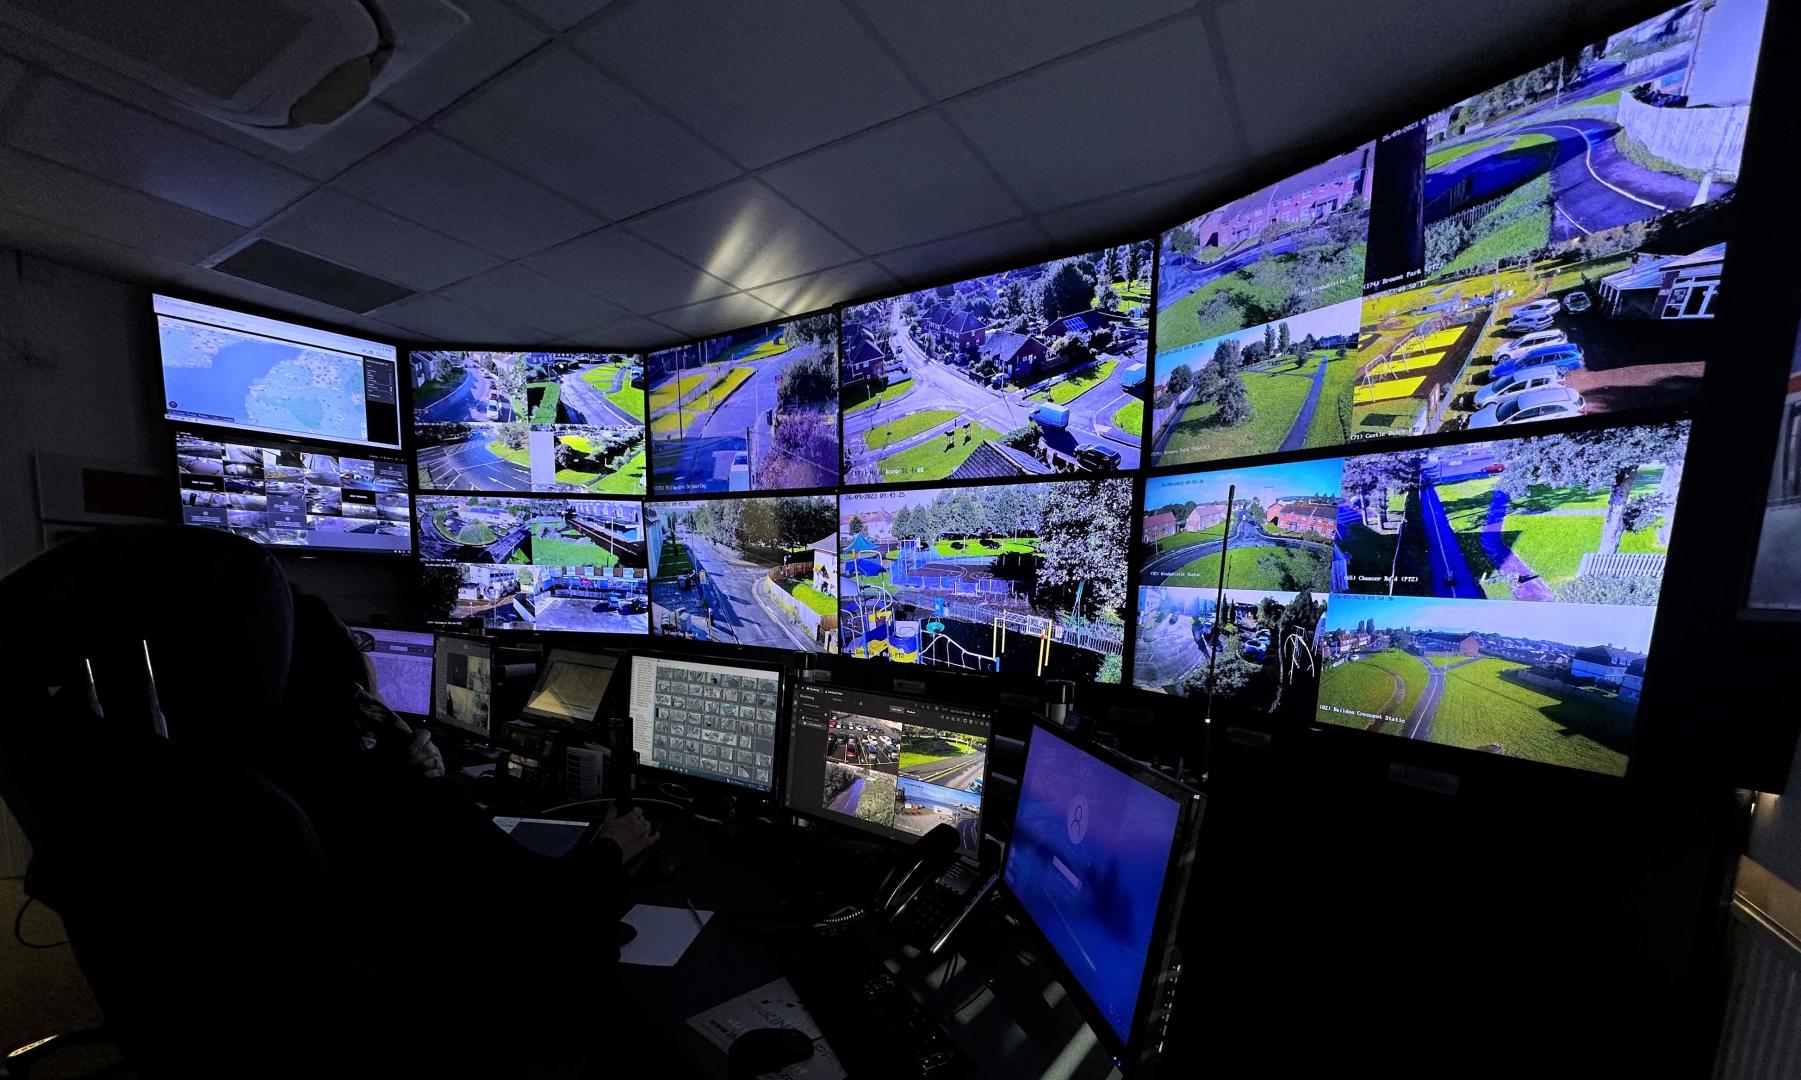 A photo of the inside of North Somerset Council's CCTV control room showing a person at a desk looking at multiple screens